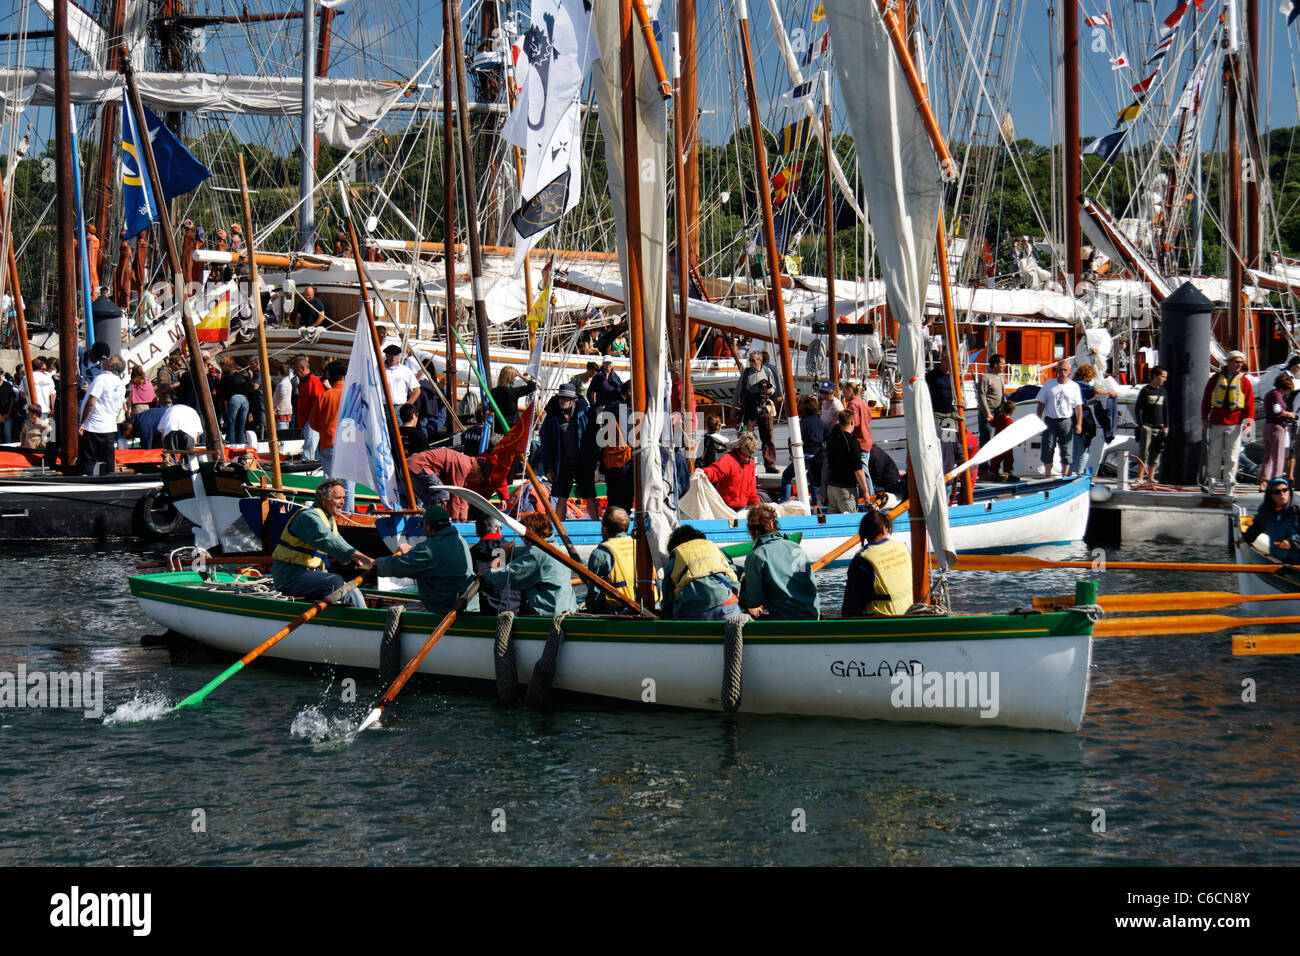 A skiff leaves port, the crew rowed,  Rosmeur port,  gathering  of traditional wooden boats (Douarnenez, France). Stock Photo